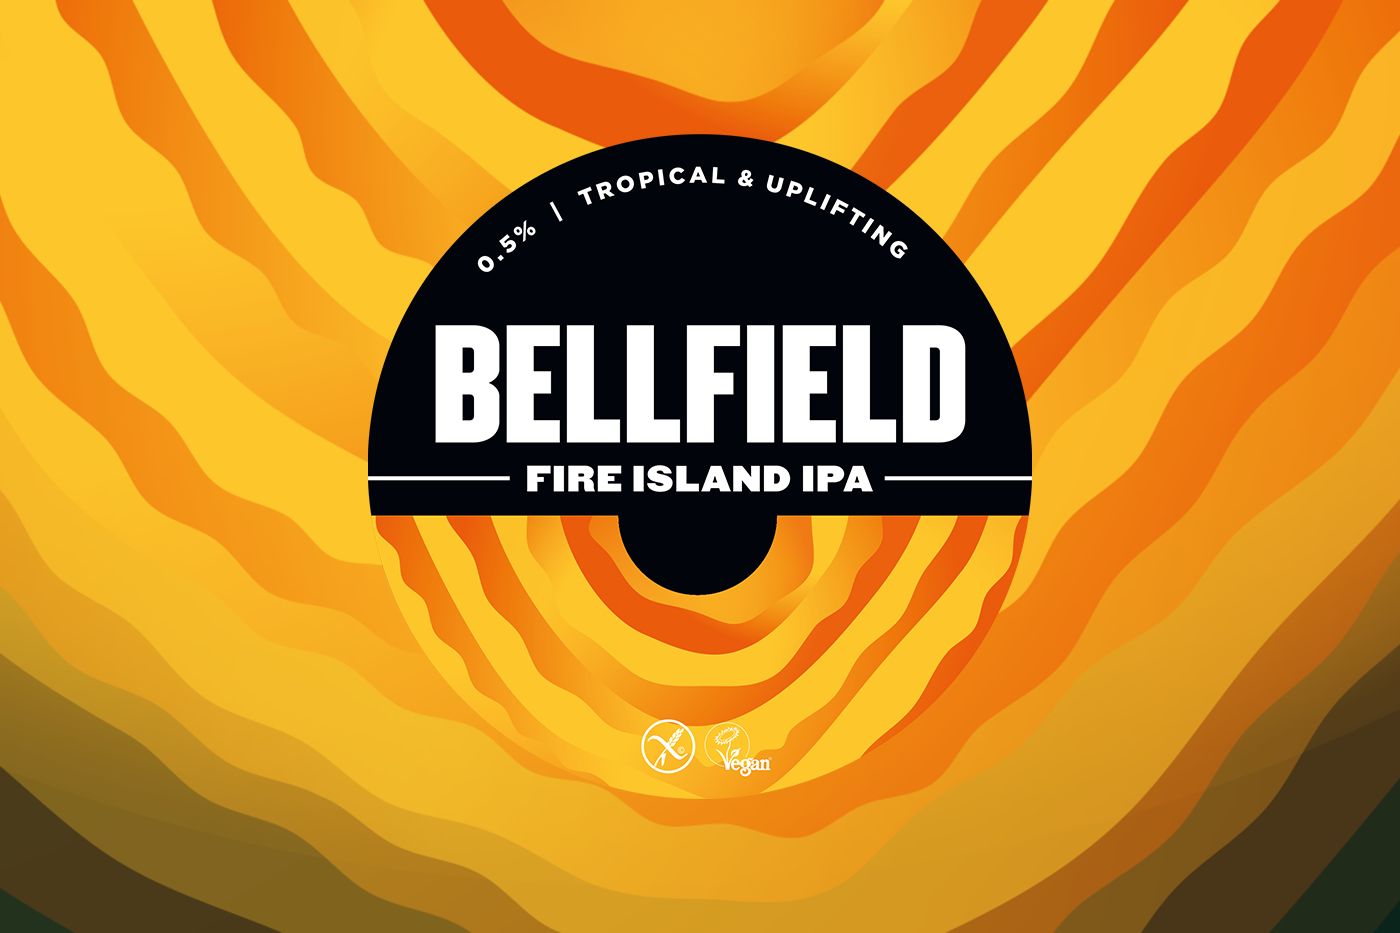 Fire Island IPA - our new non-alcoholic beer